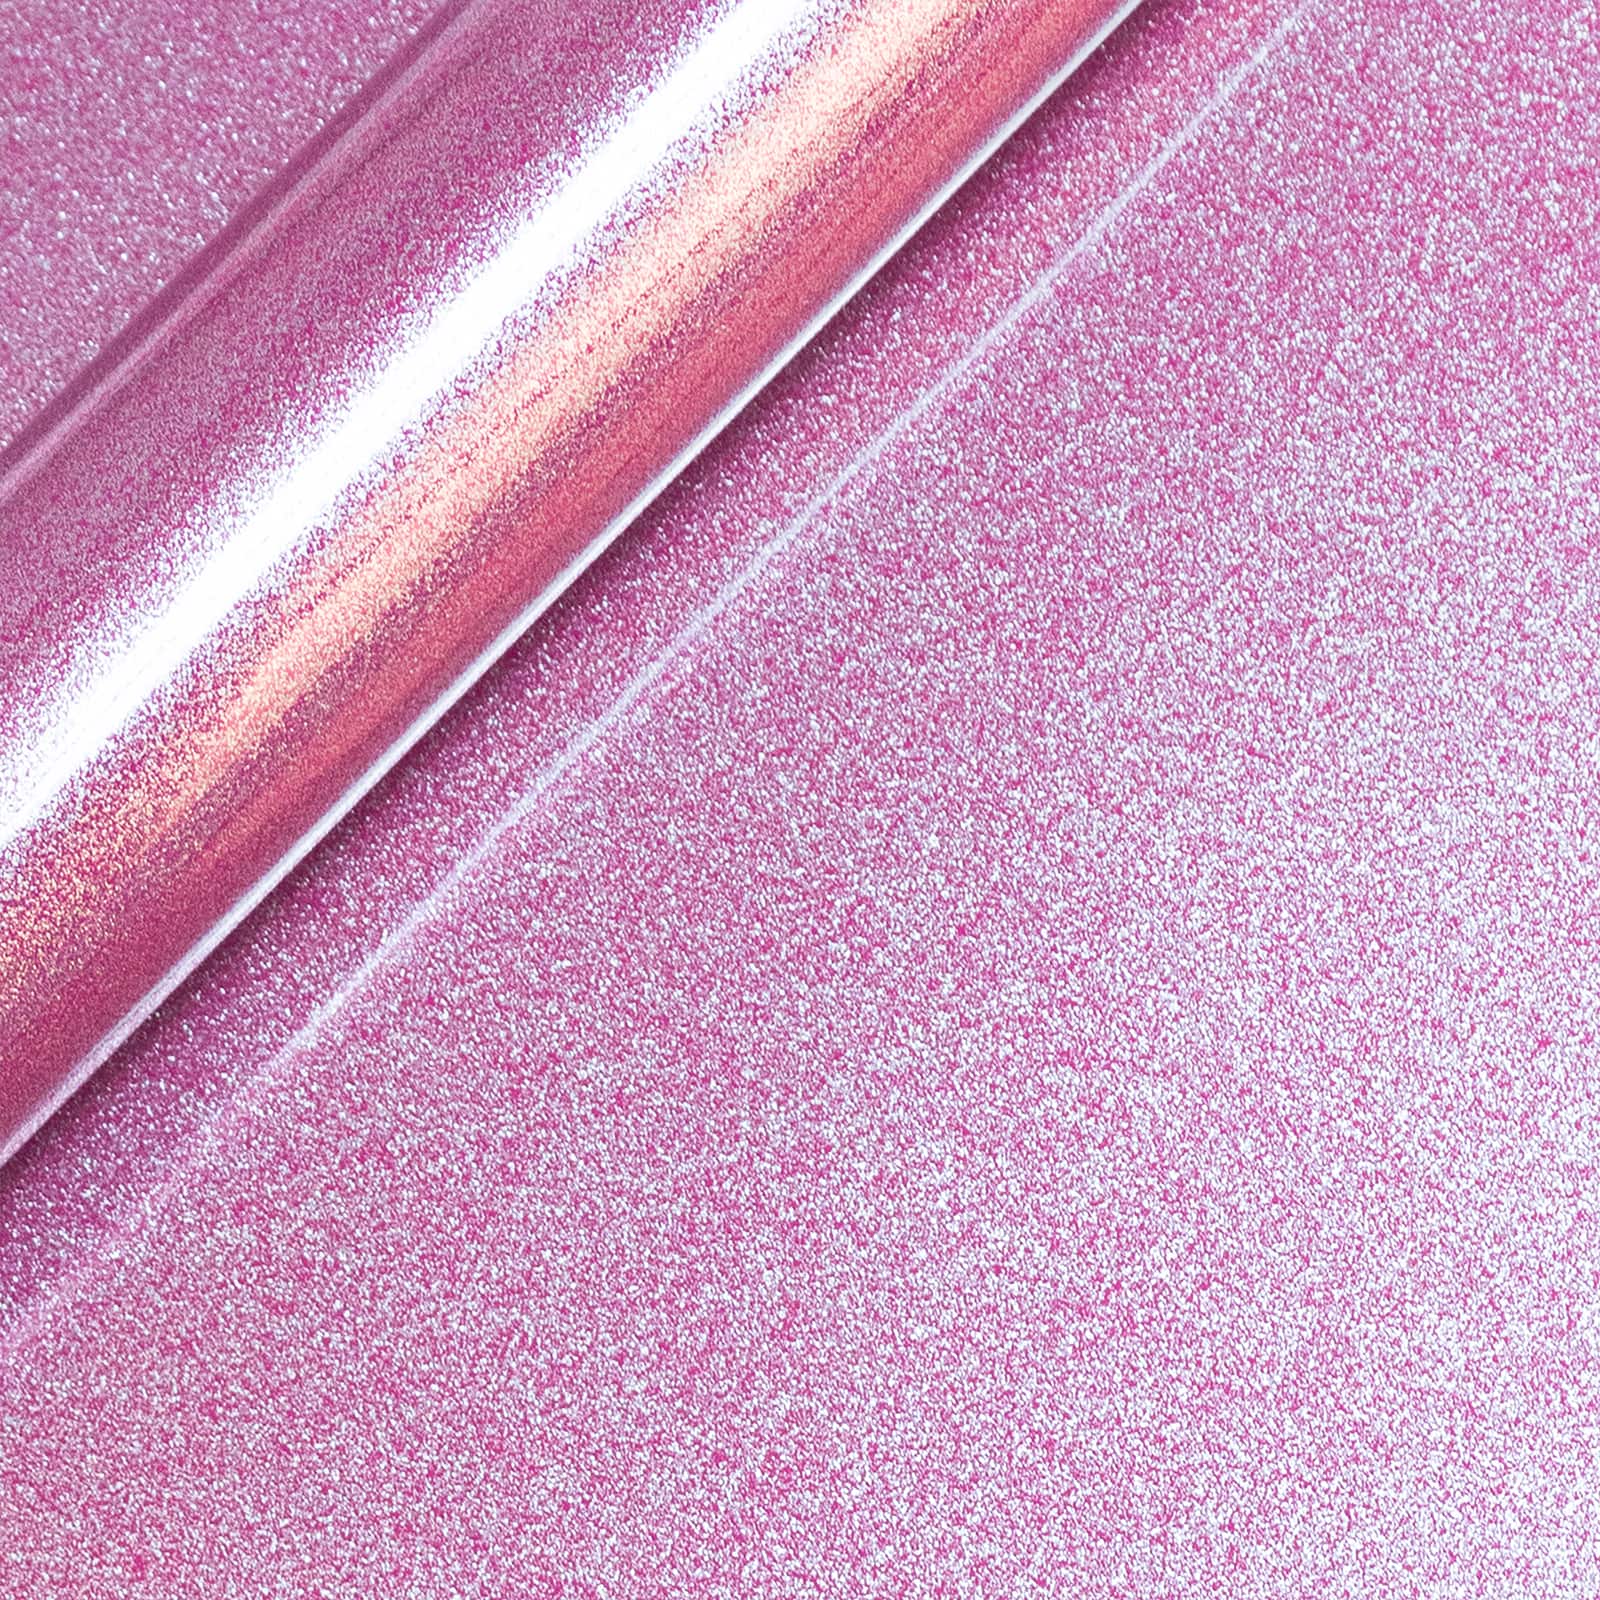  MiPremium Glitter Pink Heat Transfer Vinyl, Glitter Iron On  Vinyl (Pack of 4 Sheets), for T Shirts Sports Clothing Other Garments &  Fabrics, Easy to Cut Press & Apply Pink Glitter